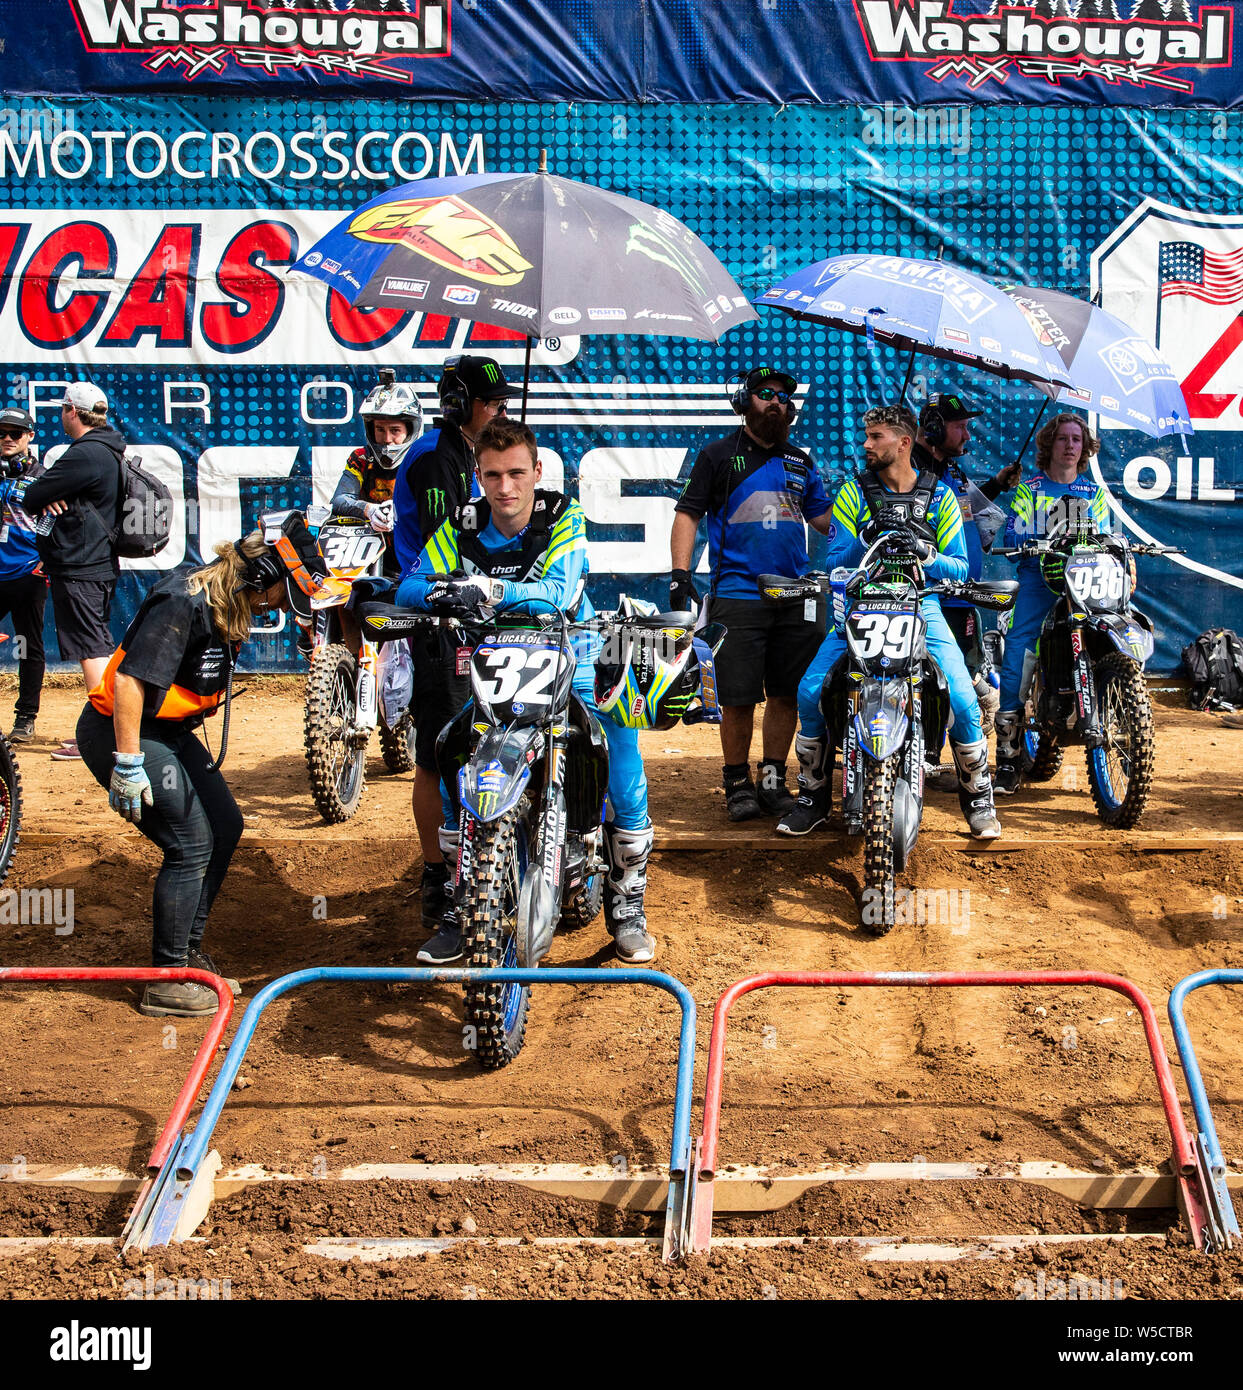 Washougal, USA. 27th July, 2019. # 32 Justin Copper and # 39 Colt Nichols at the starting line during the Lucas Oil Pro Motocross Washougal National 250 class championship at Washougal mx park Washougal, WA Thurman James/CSM/Alamy Live News Stock Photo